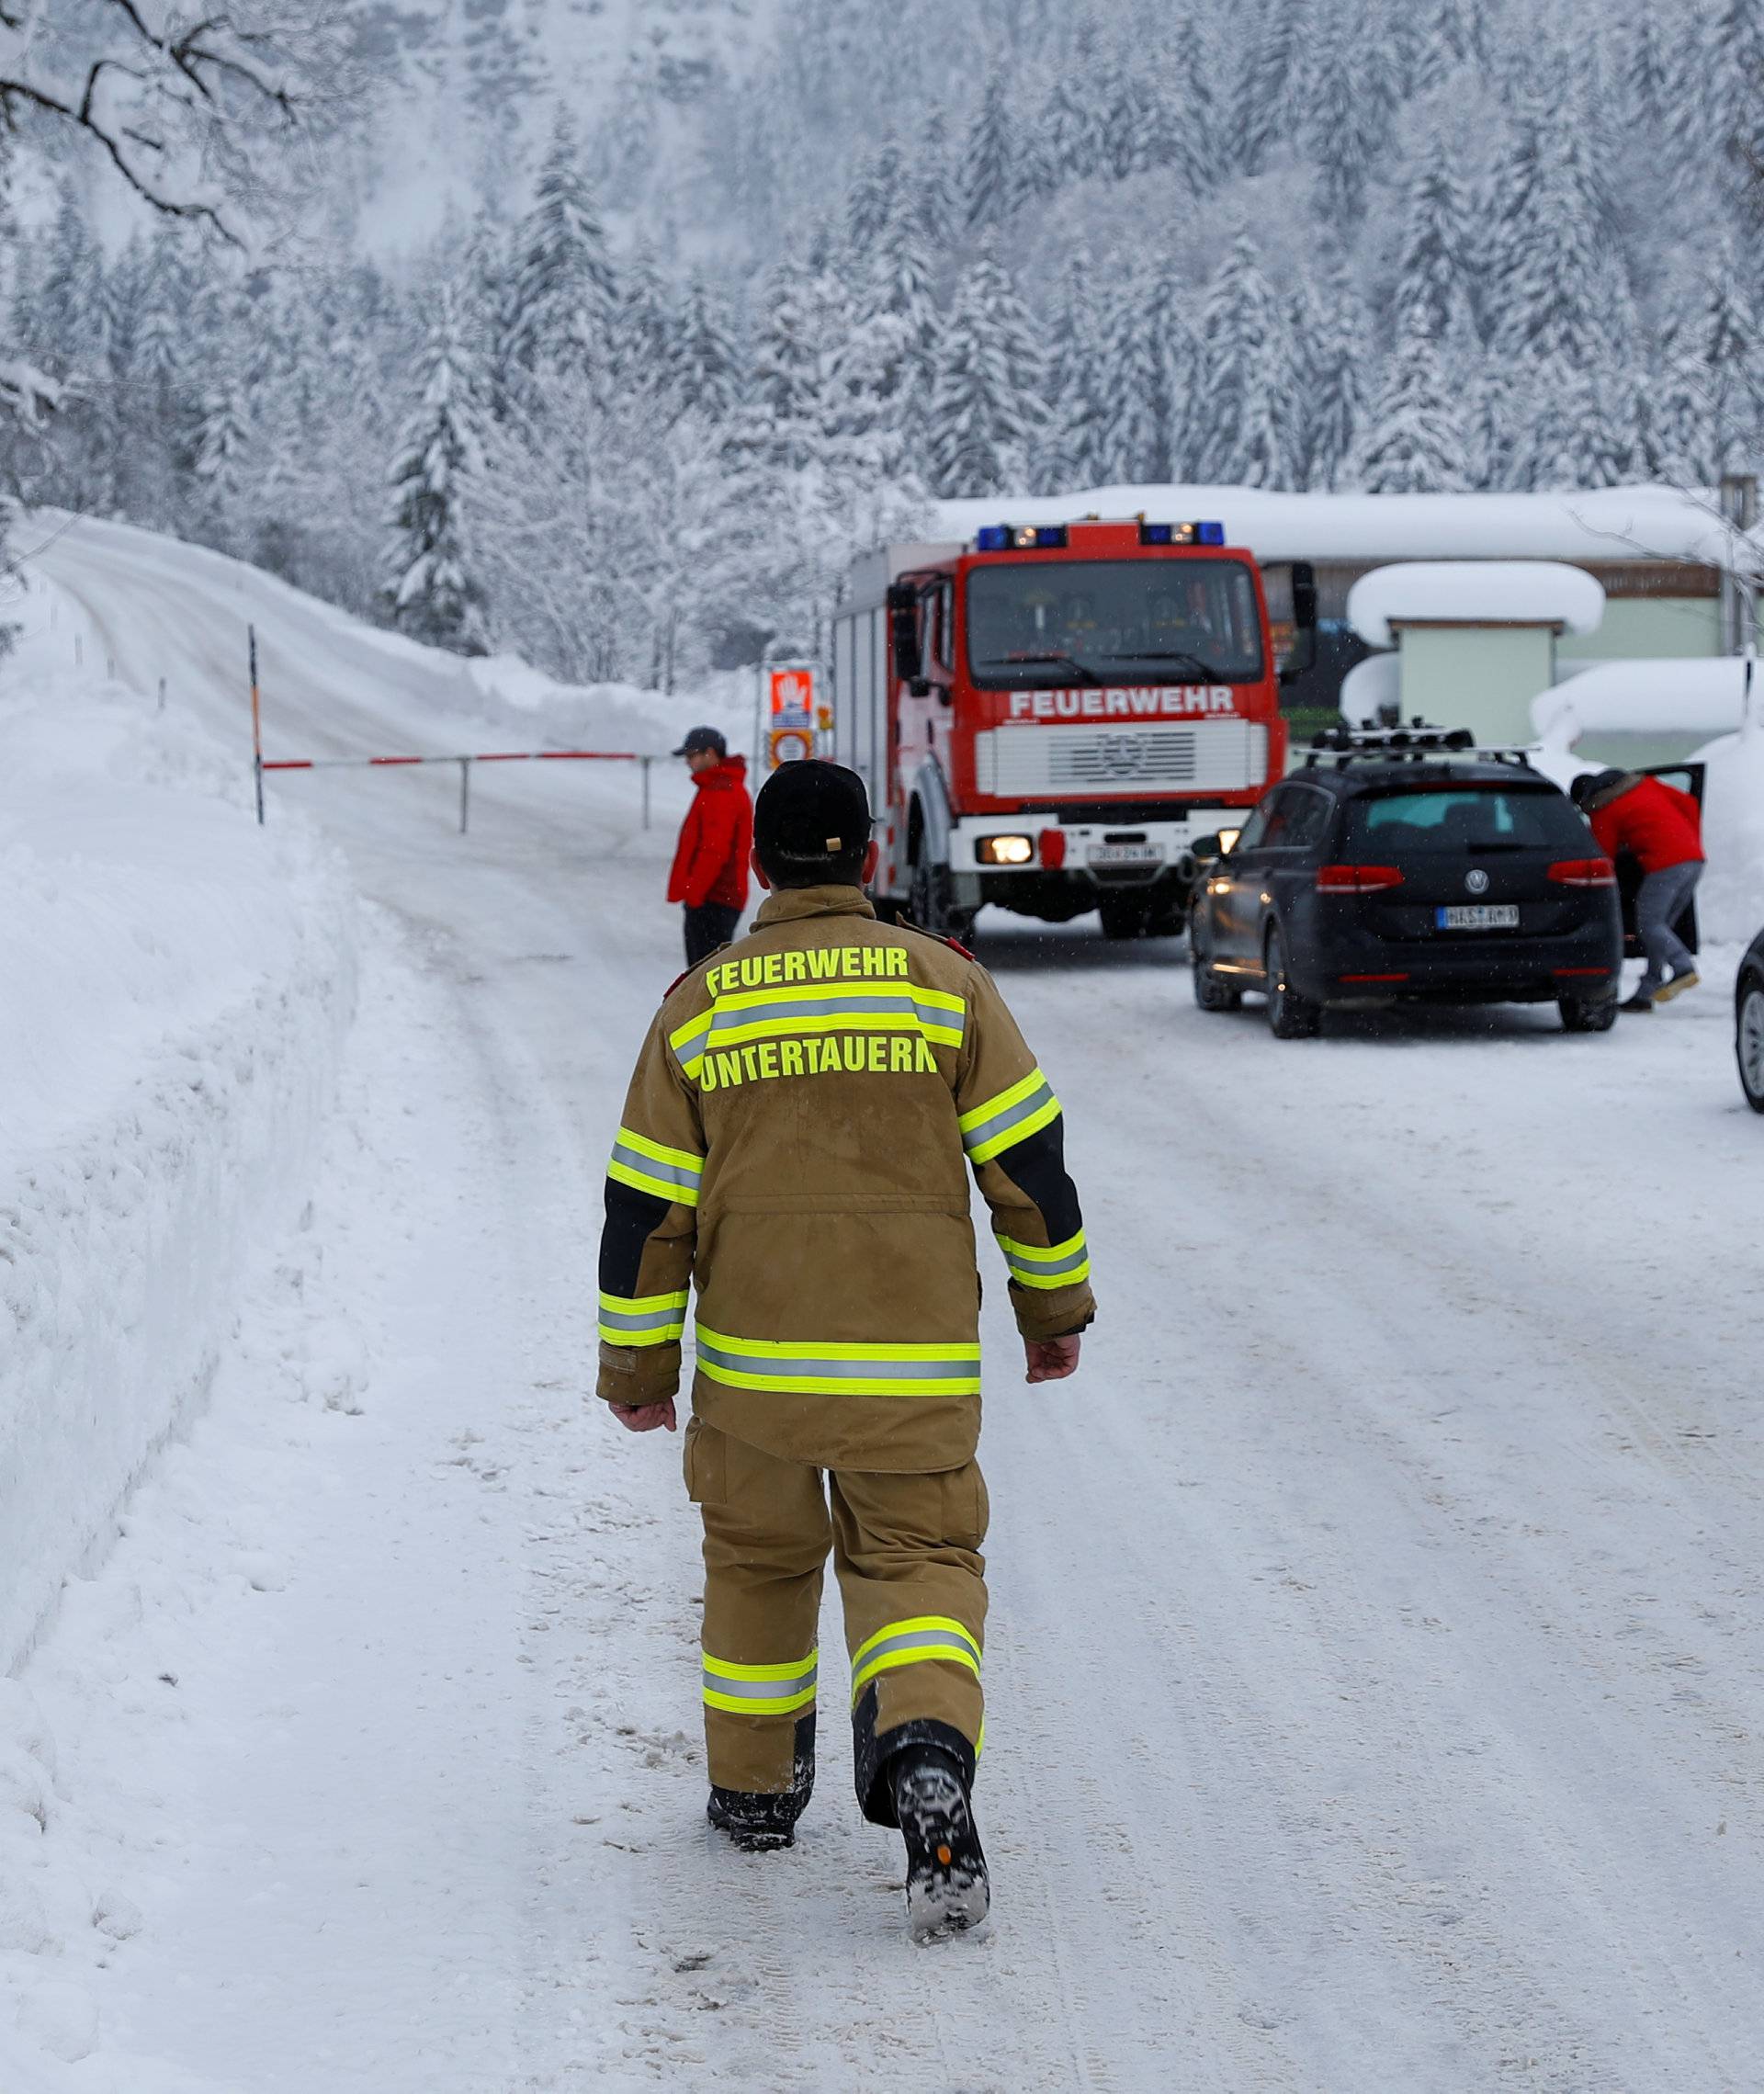 A member of the fire brigade walks on a closed road after heavy snowfall near Obertauern